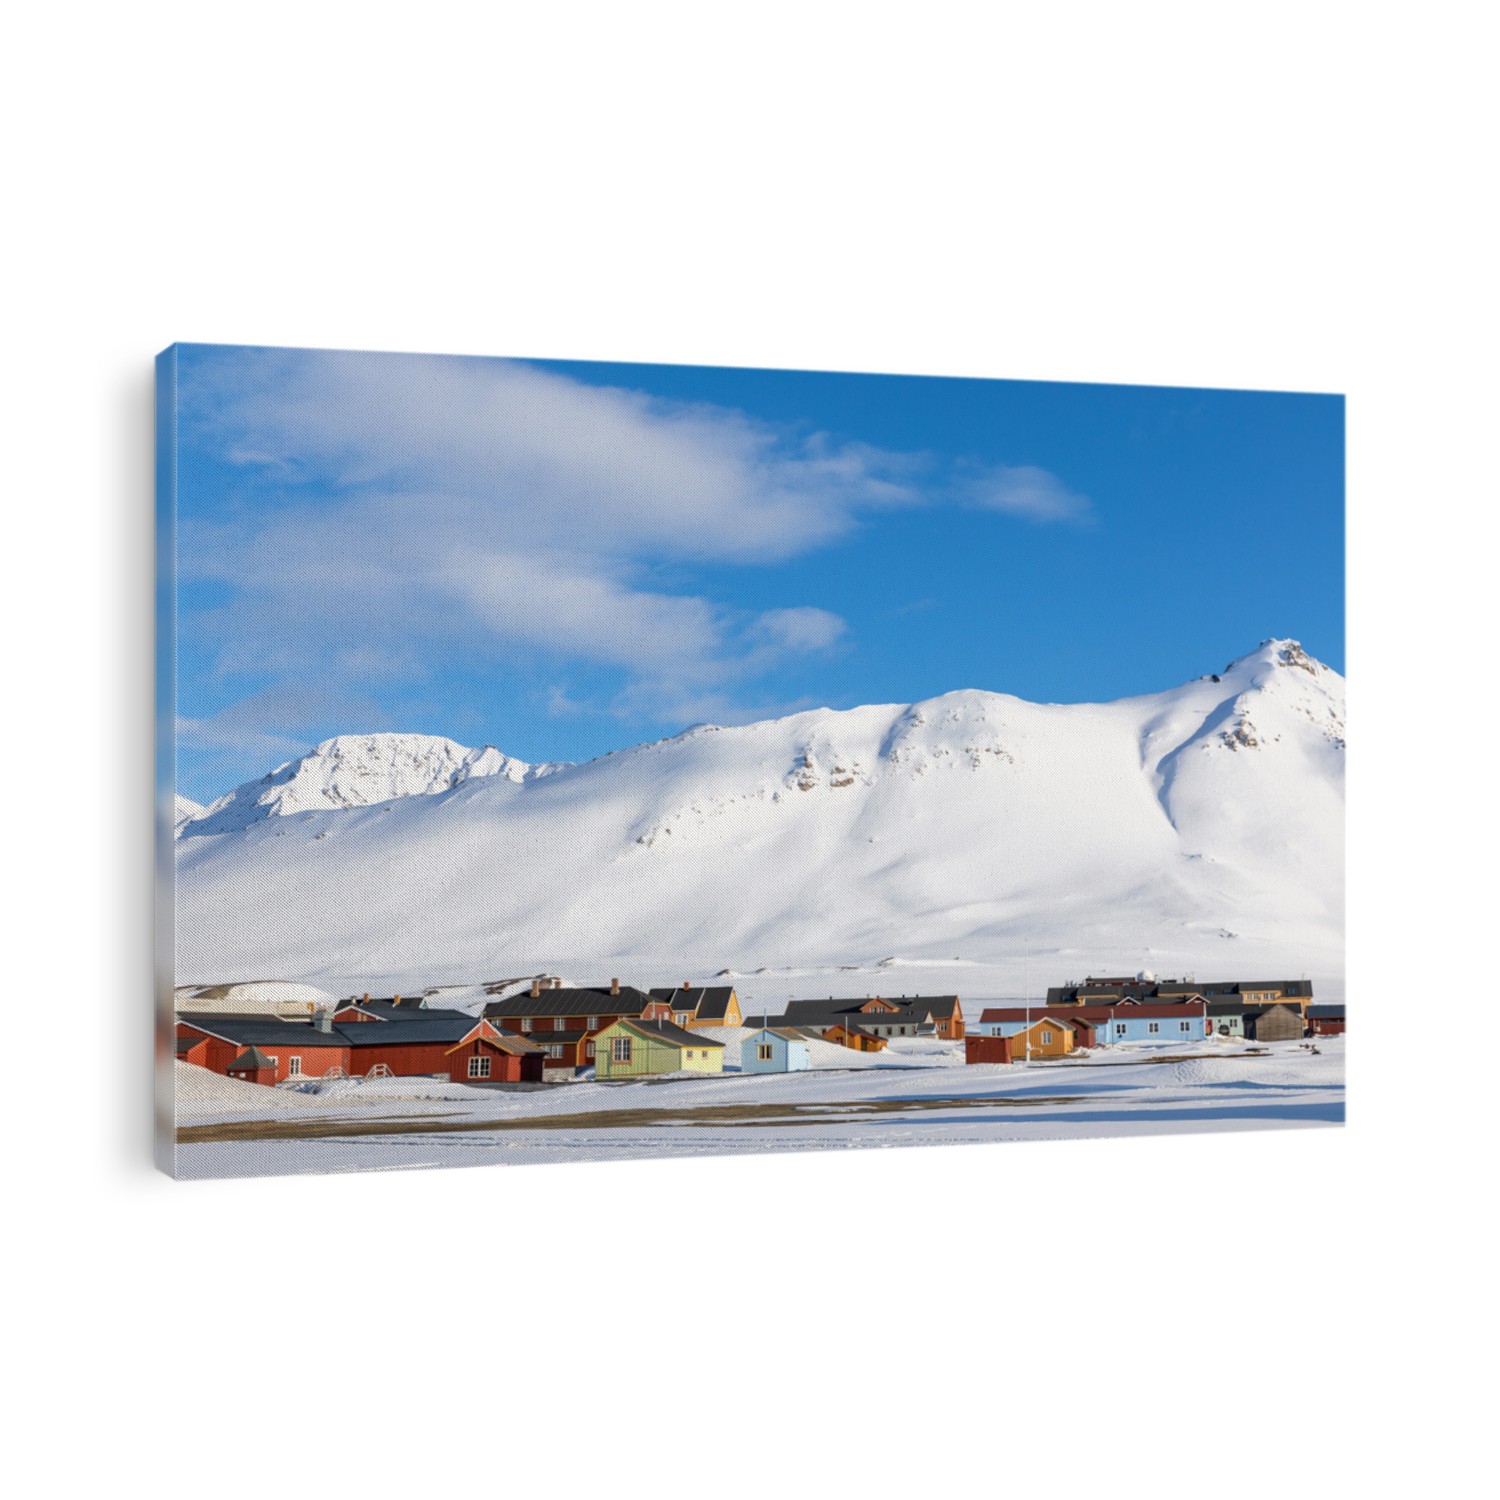 The small town of Ny Alesund in Svalbard, a Norwegian archipelago between Norway and the North Pole. This is the most northerly civilian settlement in the world and has 16 permanent research stations.